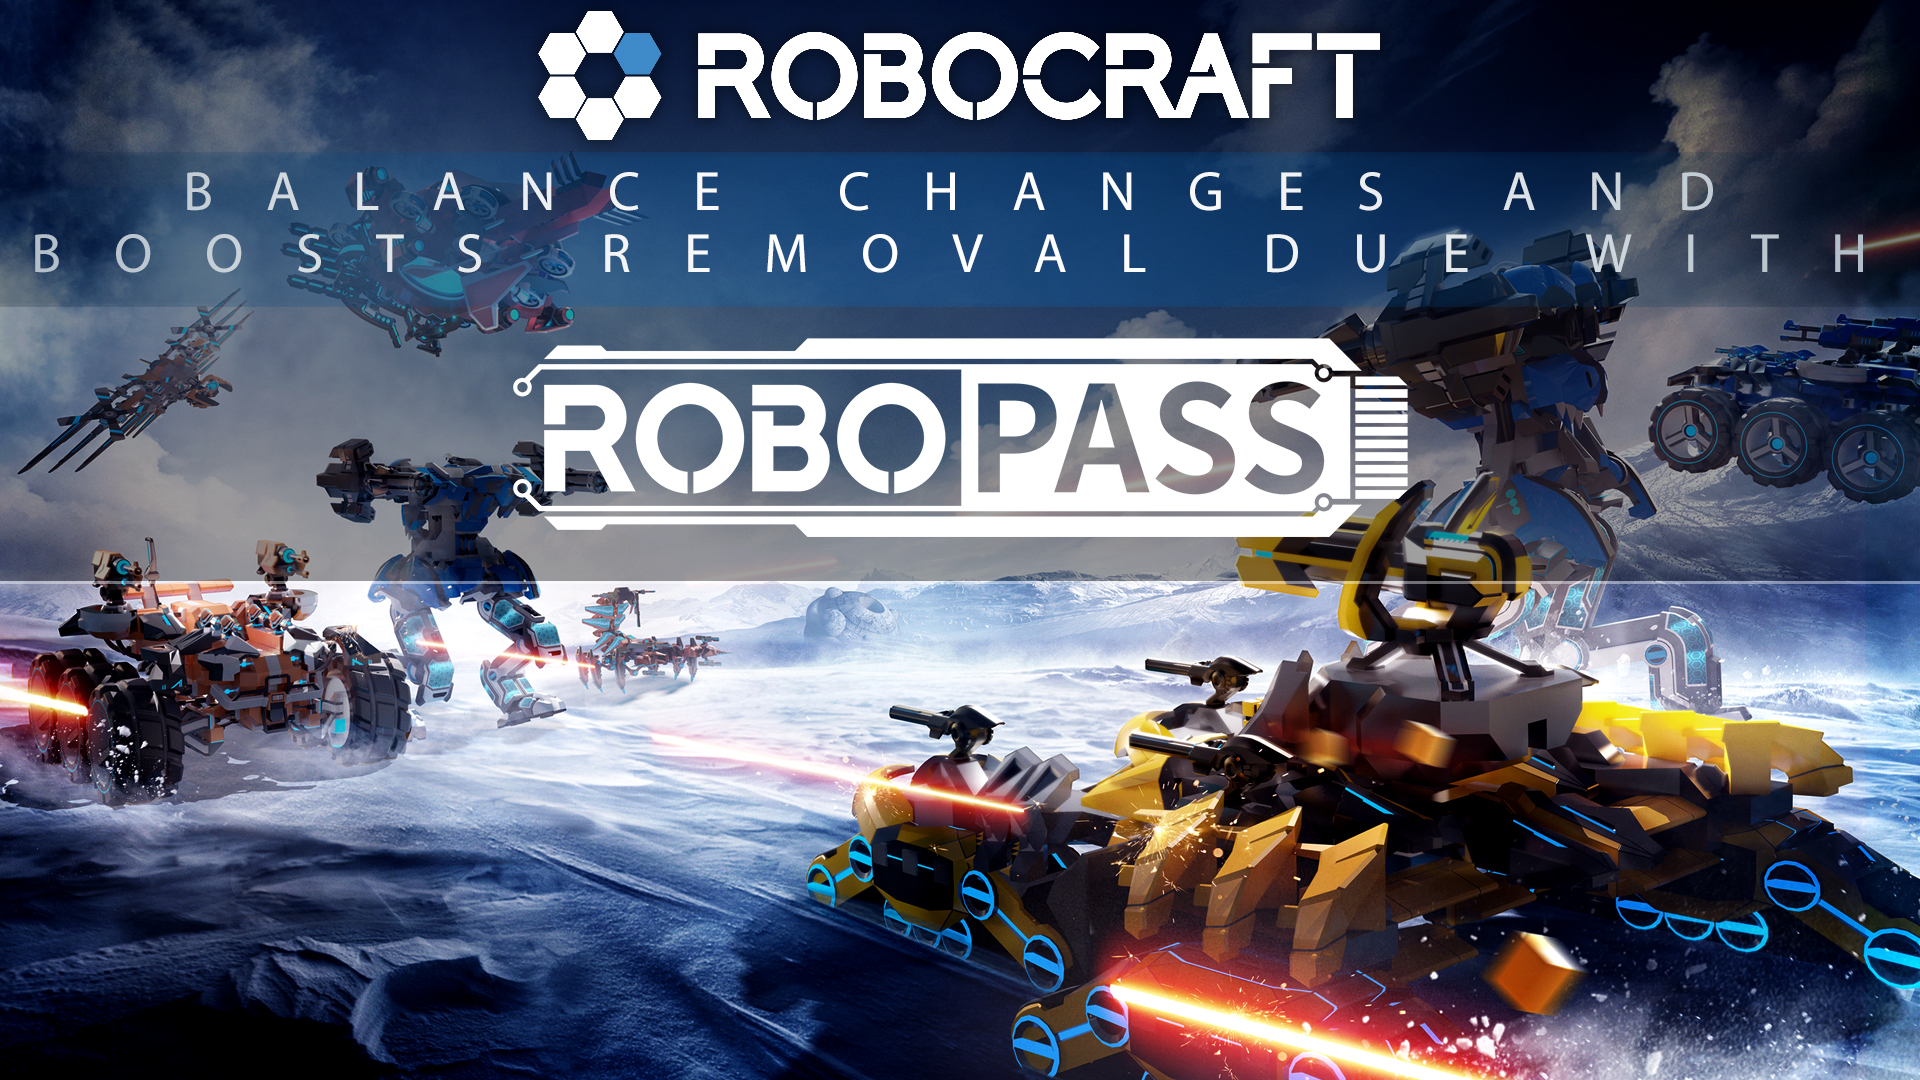 How will the removal of Robopass and Boosts affect the game's balance? Since Robopass and Boosts gave players advantages such as faster progression and exclusive items, their removal will level the playing field and make the game more skill-based.
When will Robopass and Boosts be removed? The exact date of the removal of Robopass and Boosts has not been announced yet but it is expected to happen in the near future.